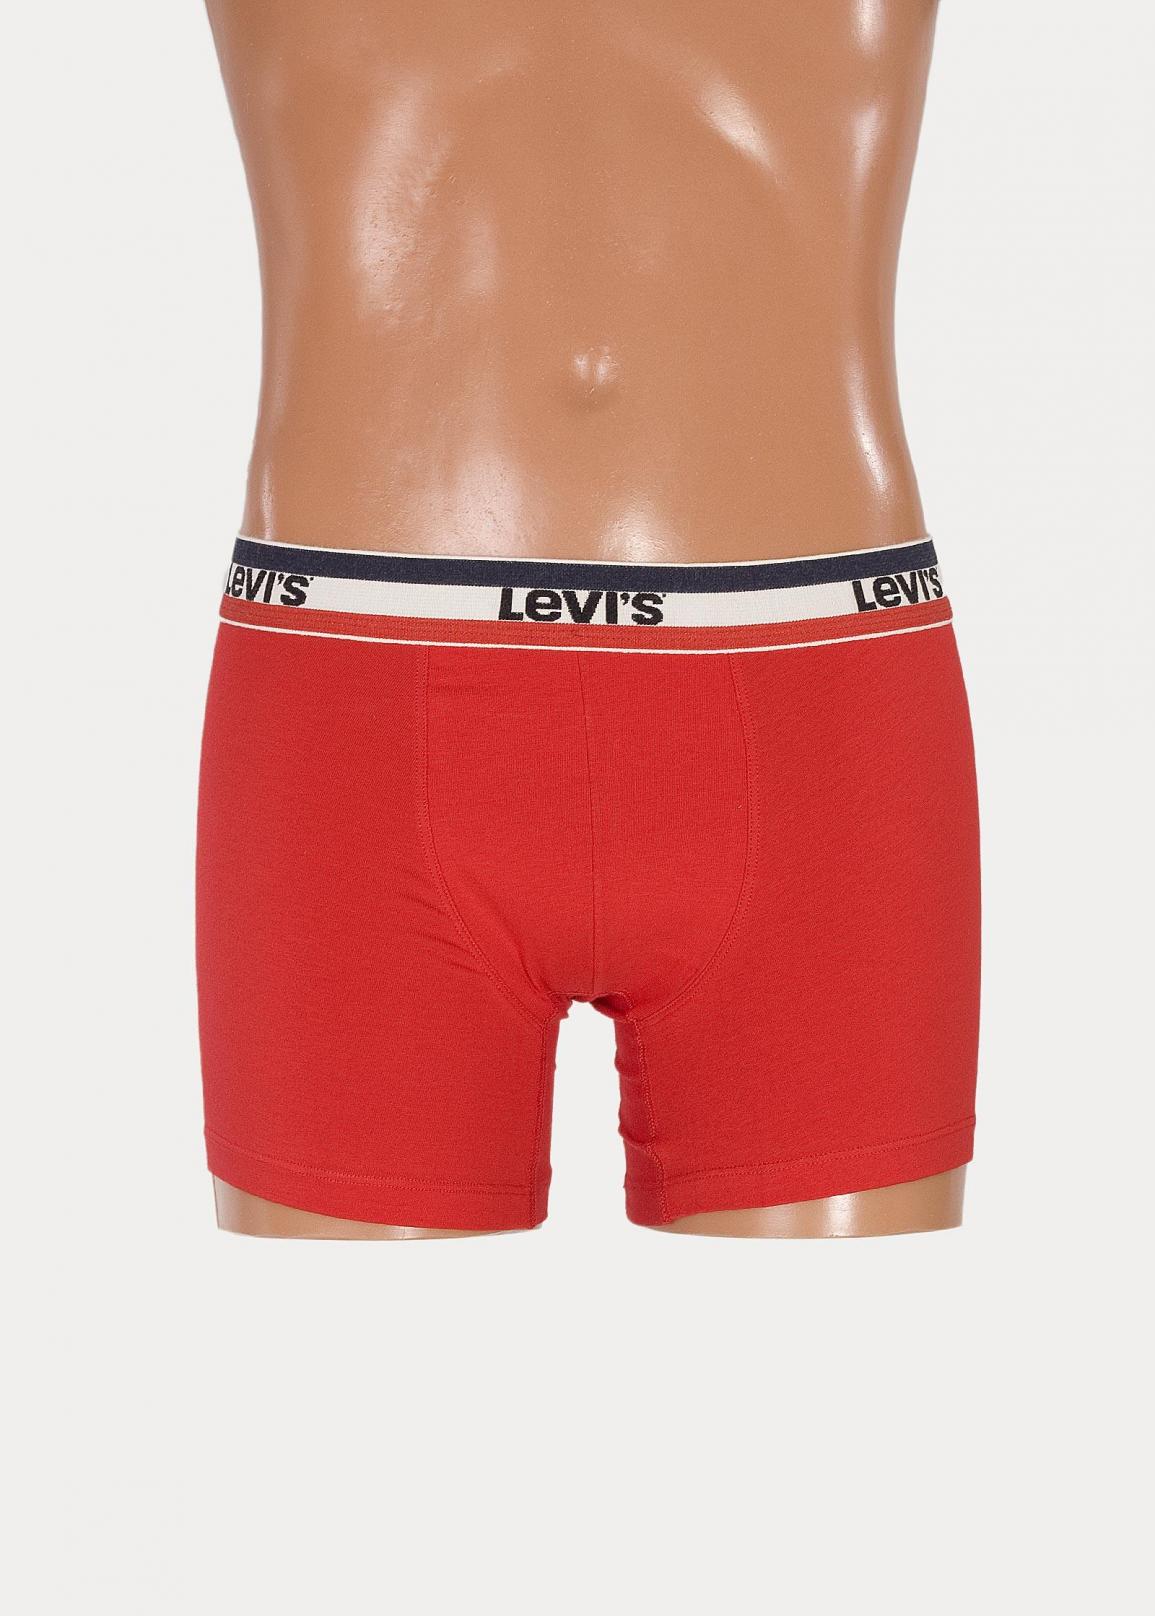 Levi's® 200sf Boxer Brief 2Pack - Red/black